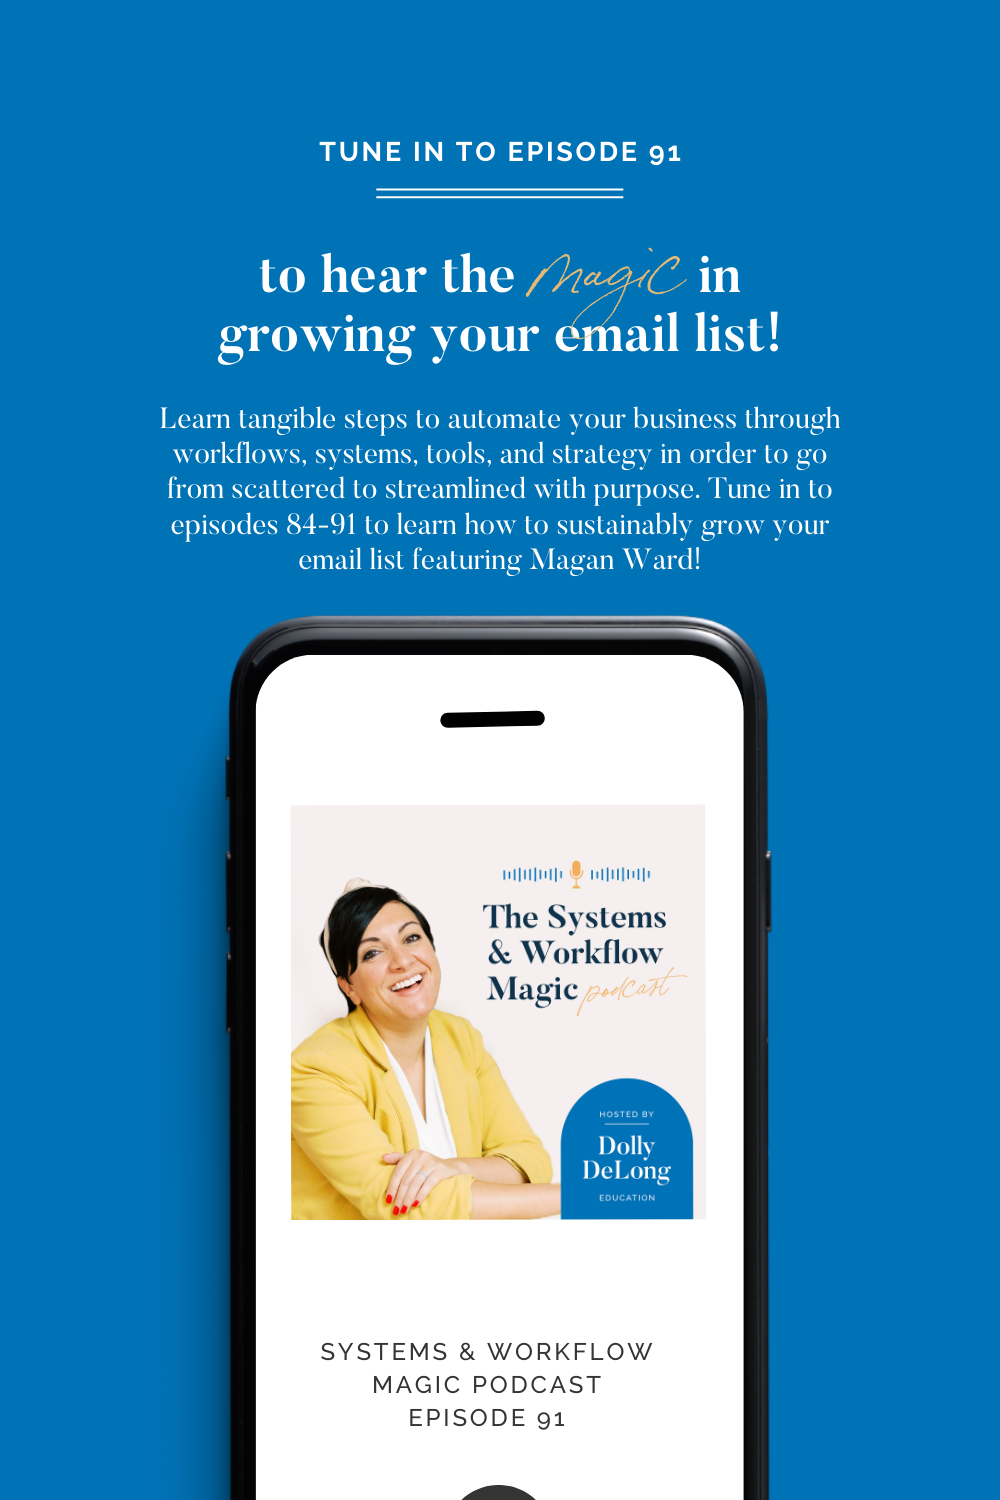 91: The Road to Email List Success: The Bundle Intensive is Officially Open featuring Magan Ward